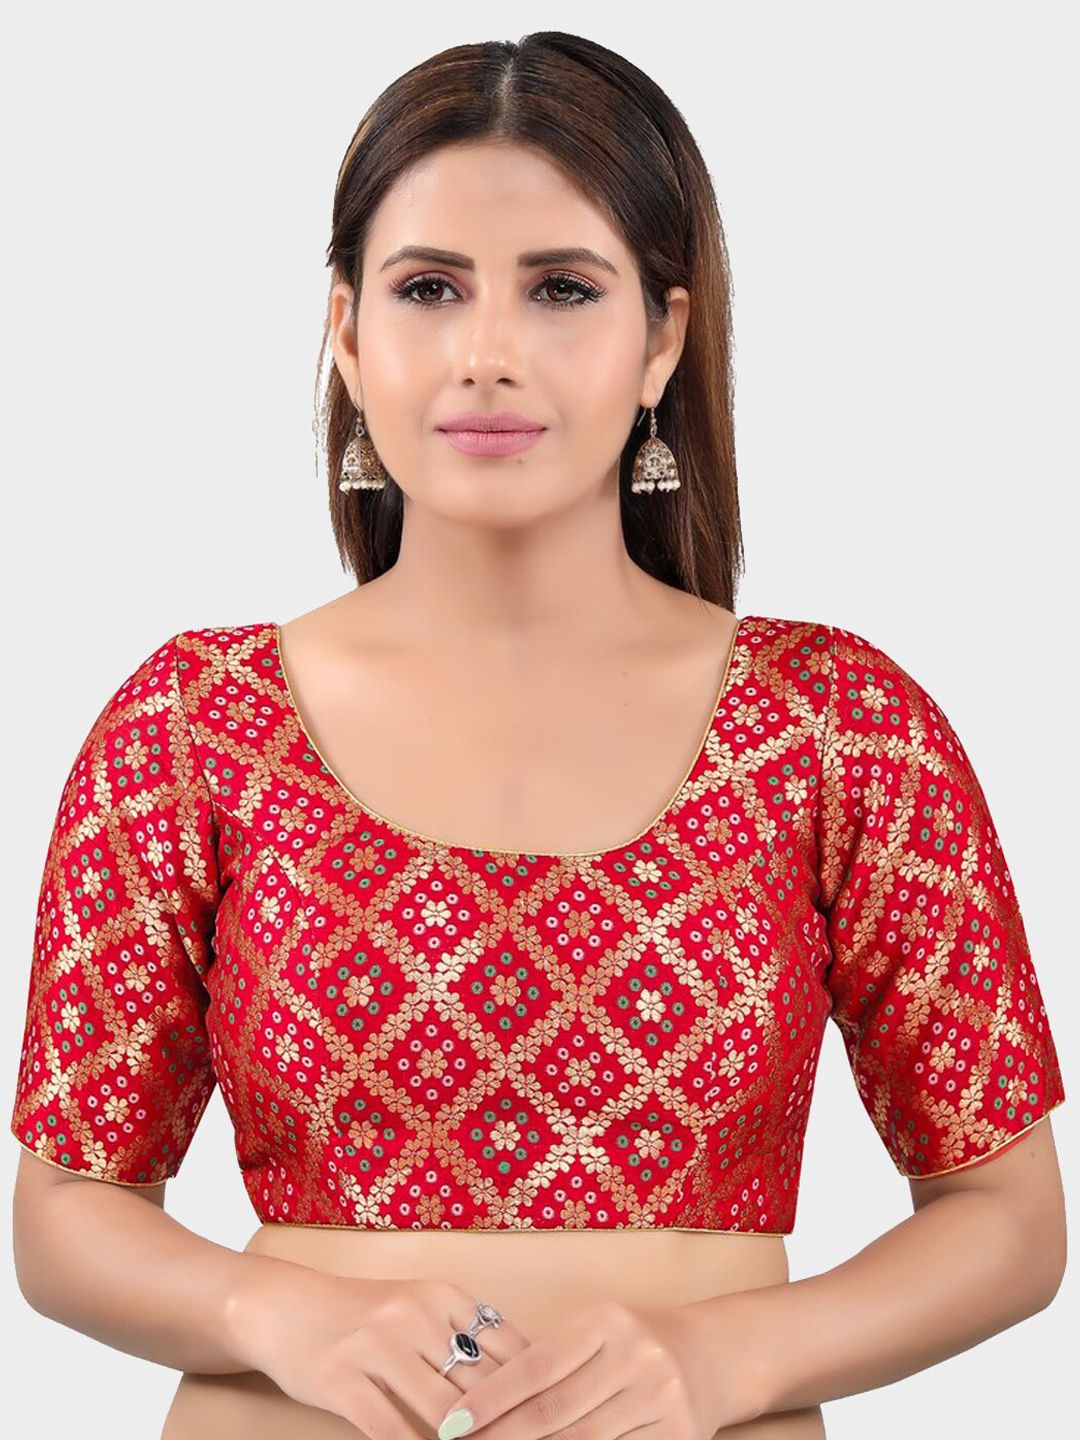 SALWAR STUDIO Red & Gold-Coloured Brocade Printed Readymade Saree Blouse Price in India